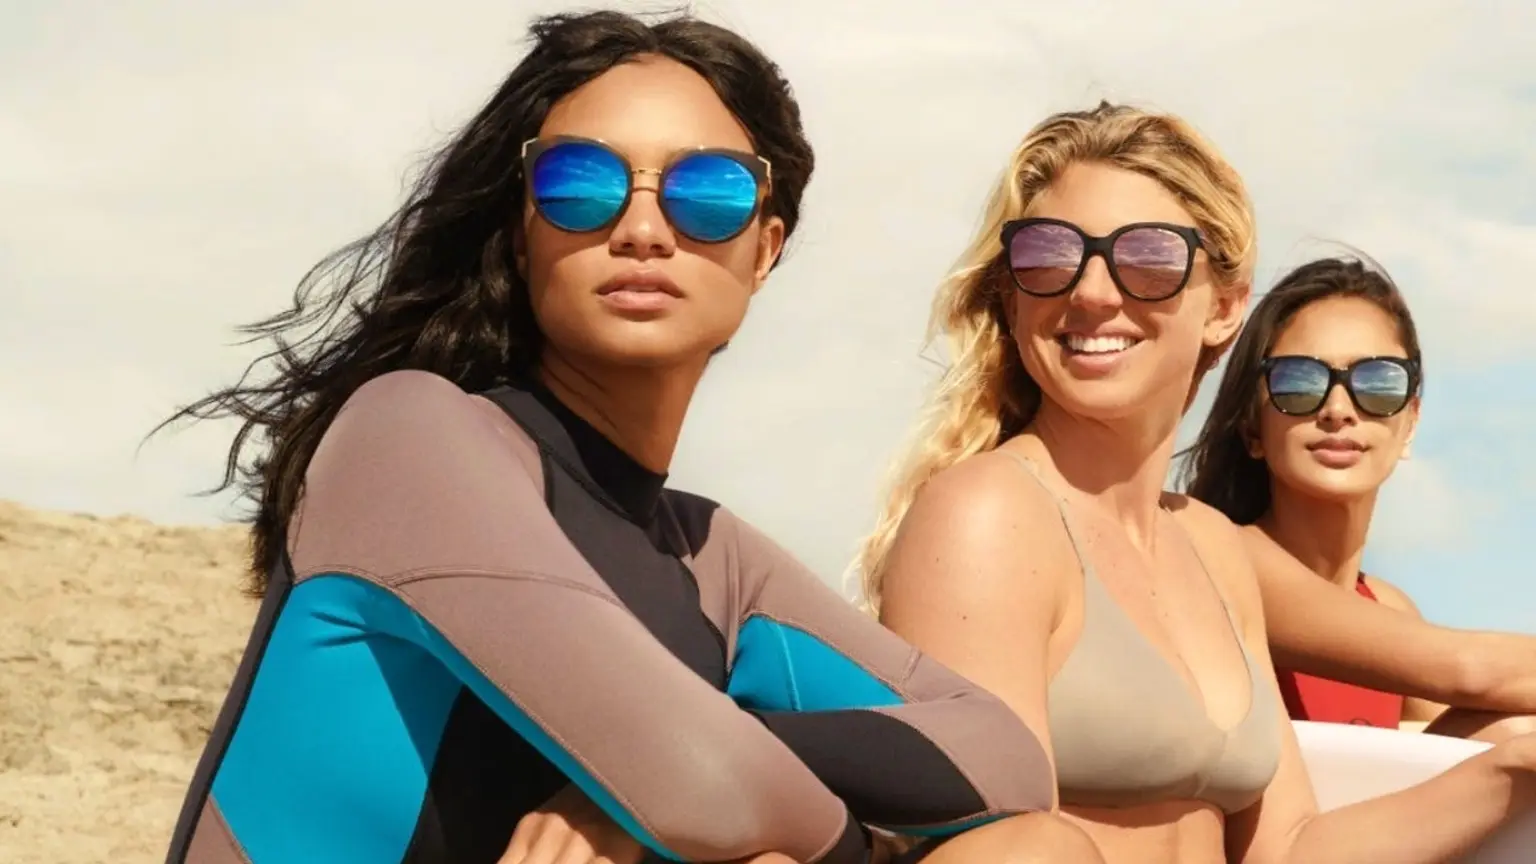 Where to buy Oakley sunglasses online 